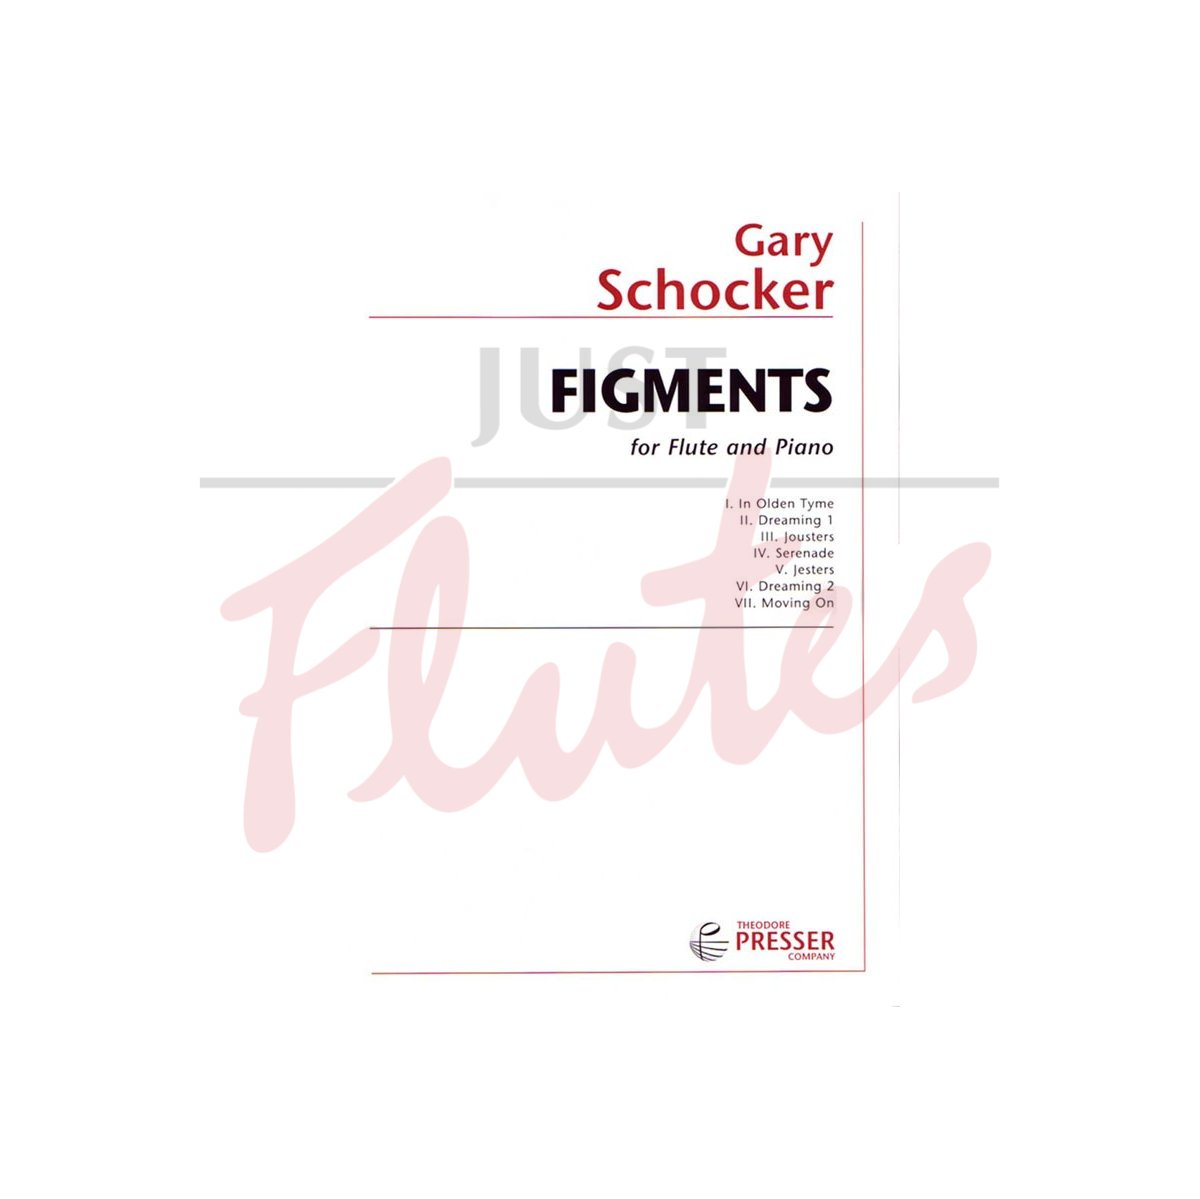 Figments for Flute and Piano